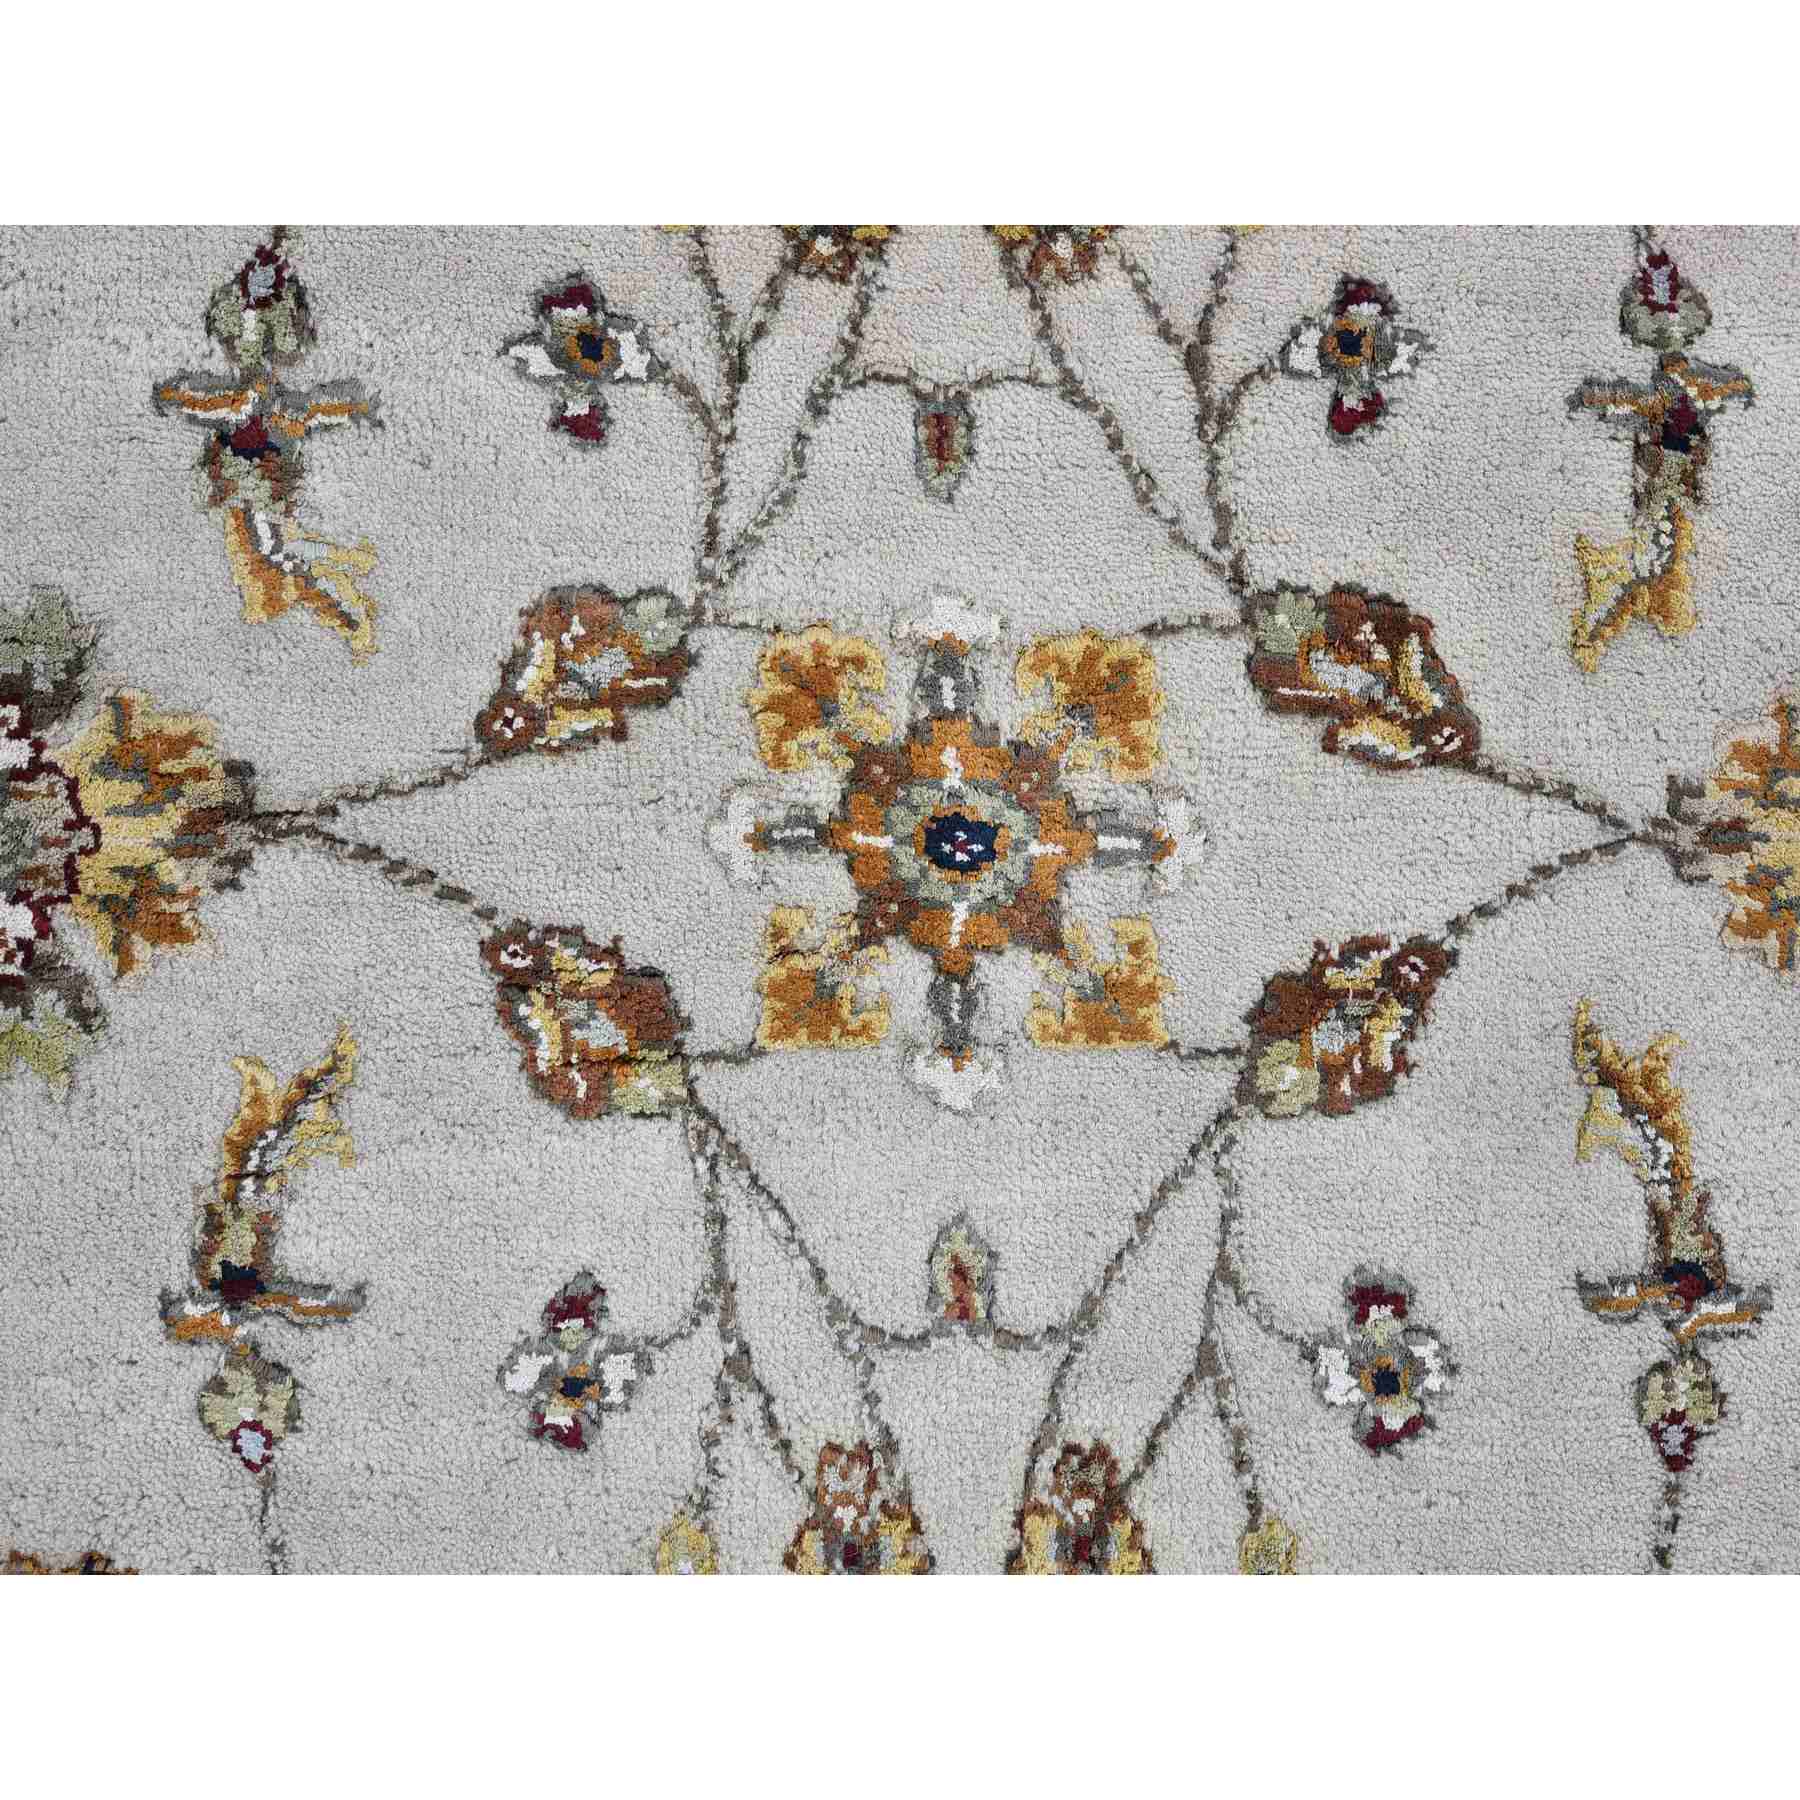 Rajasthan-Hand-Knotted-Rug-333895